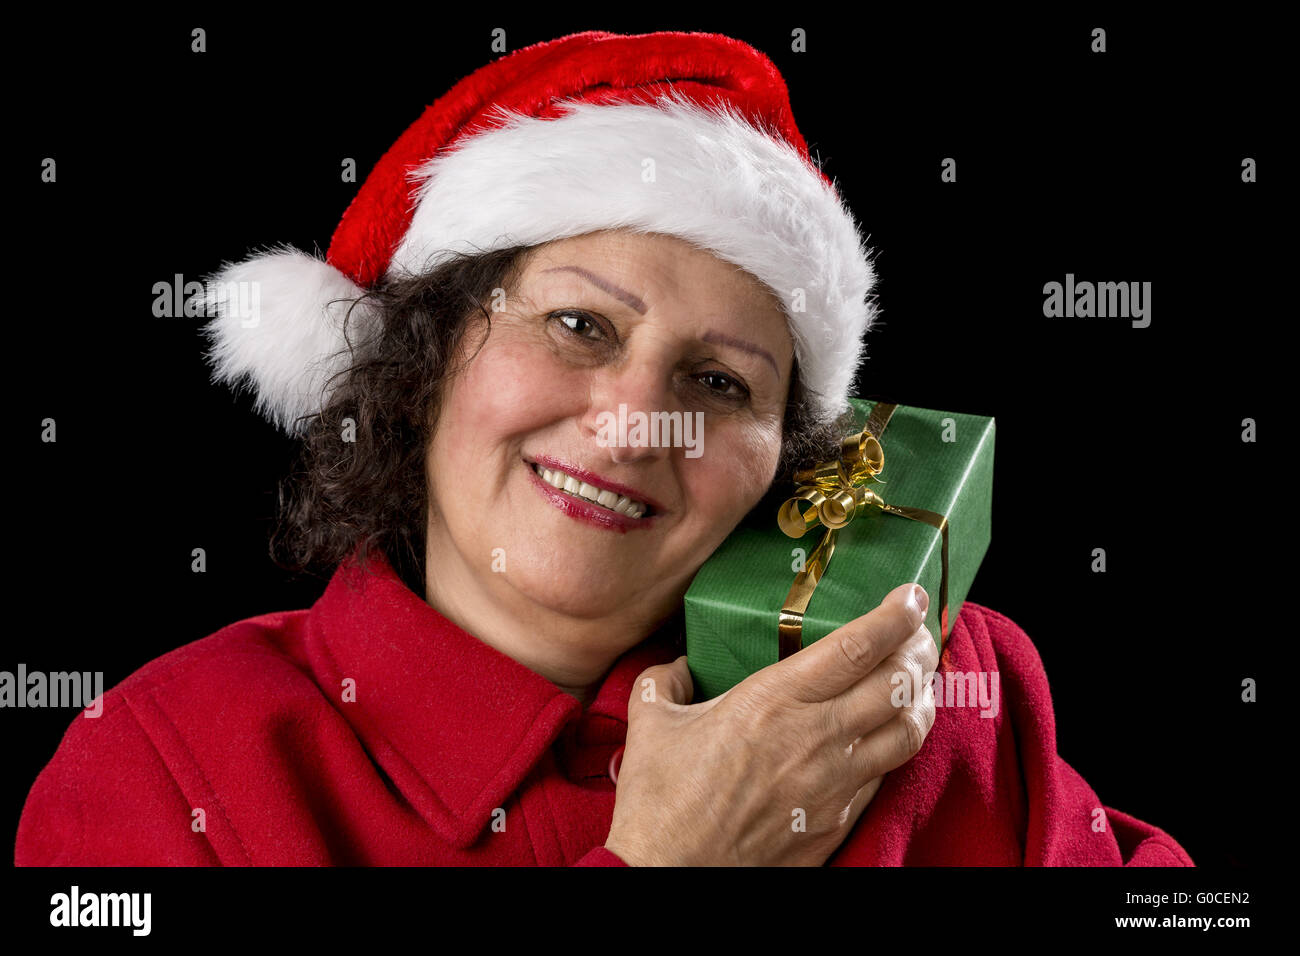 Senior Lady with Santa Claus Hat and Wrapped Gift Stock Photo